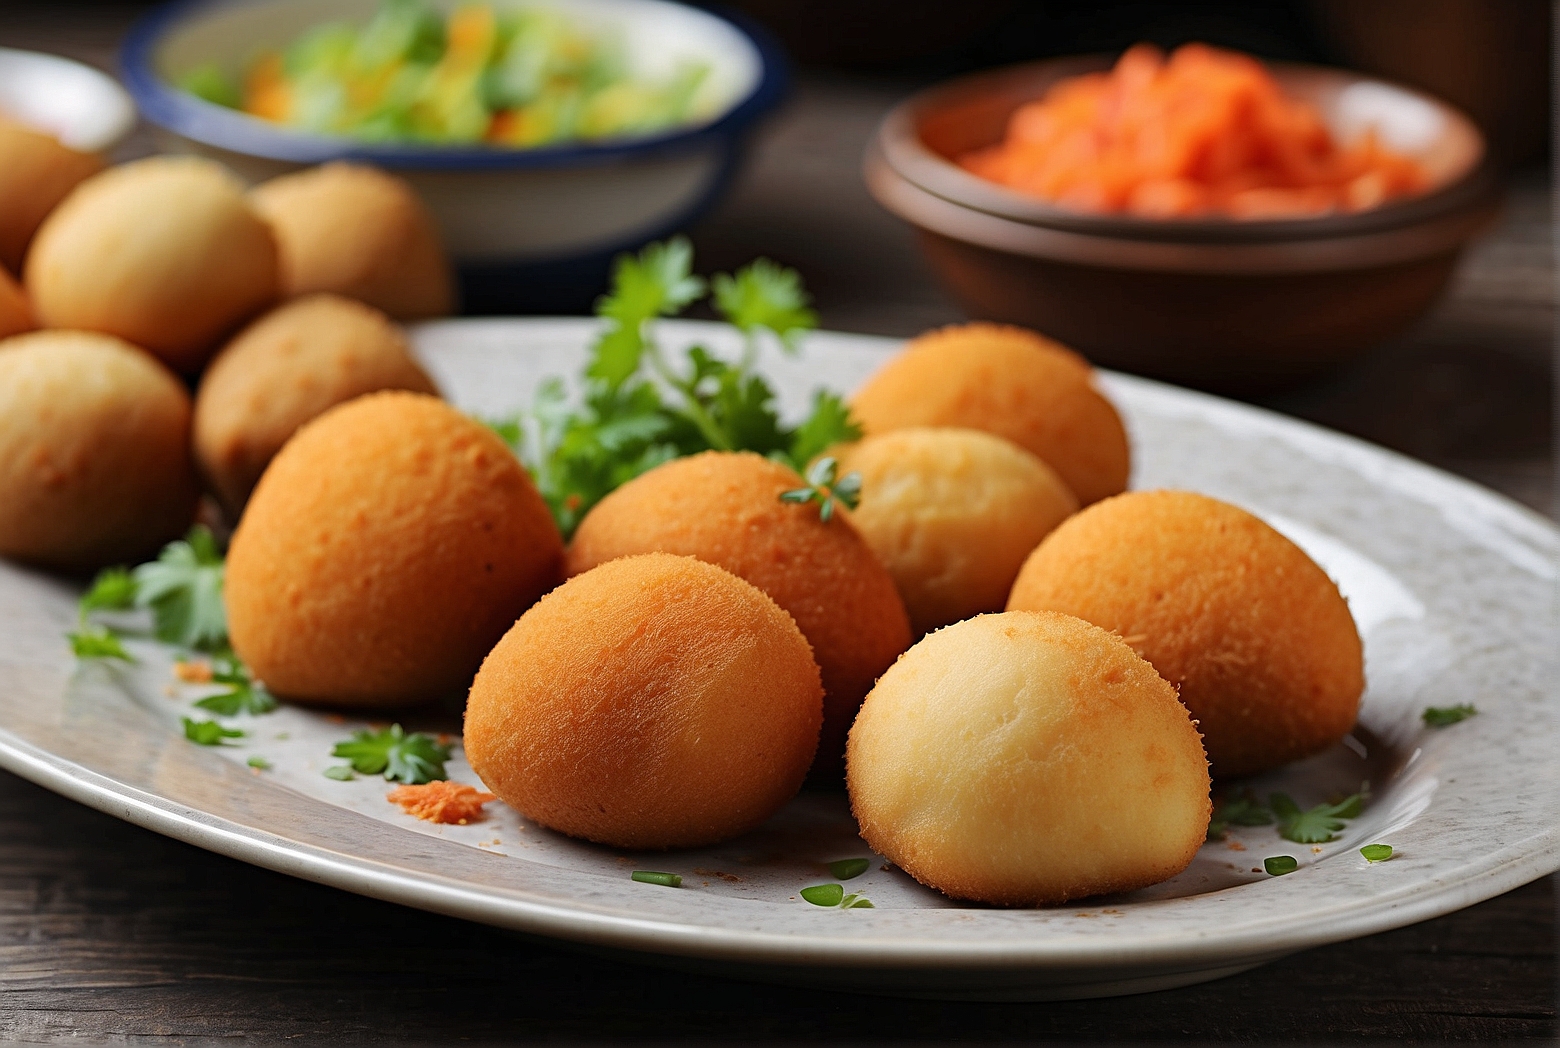 Delicious Side Dishes to Serve with Coxinha